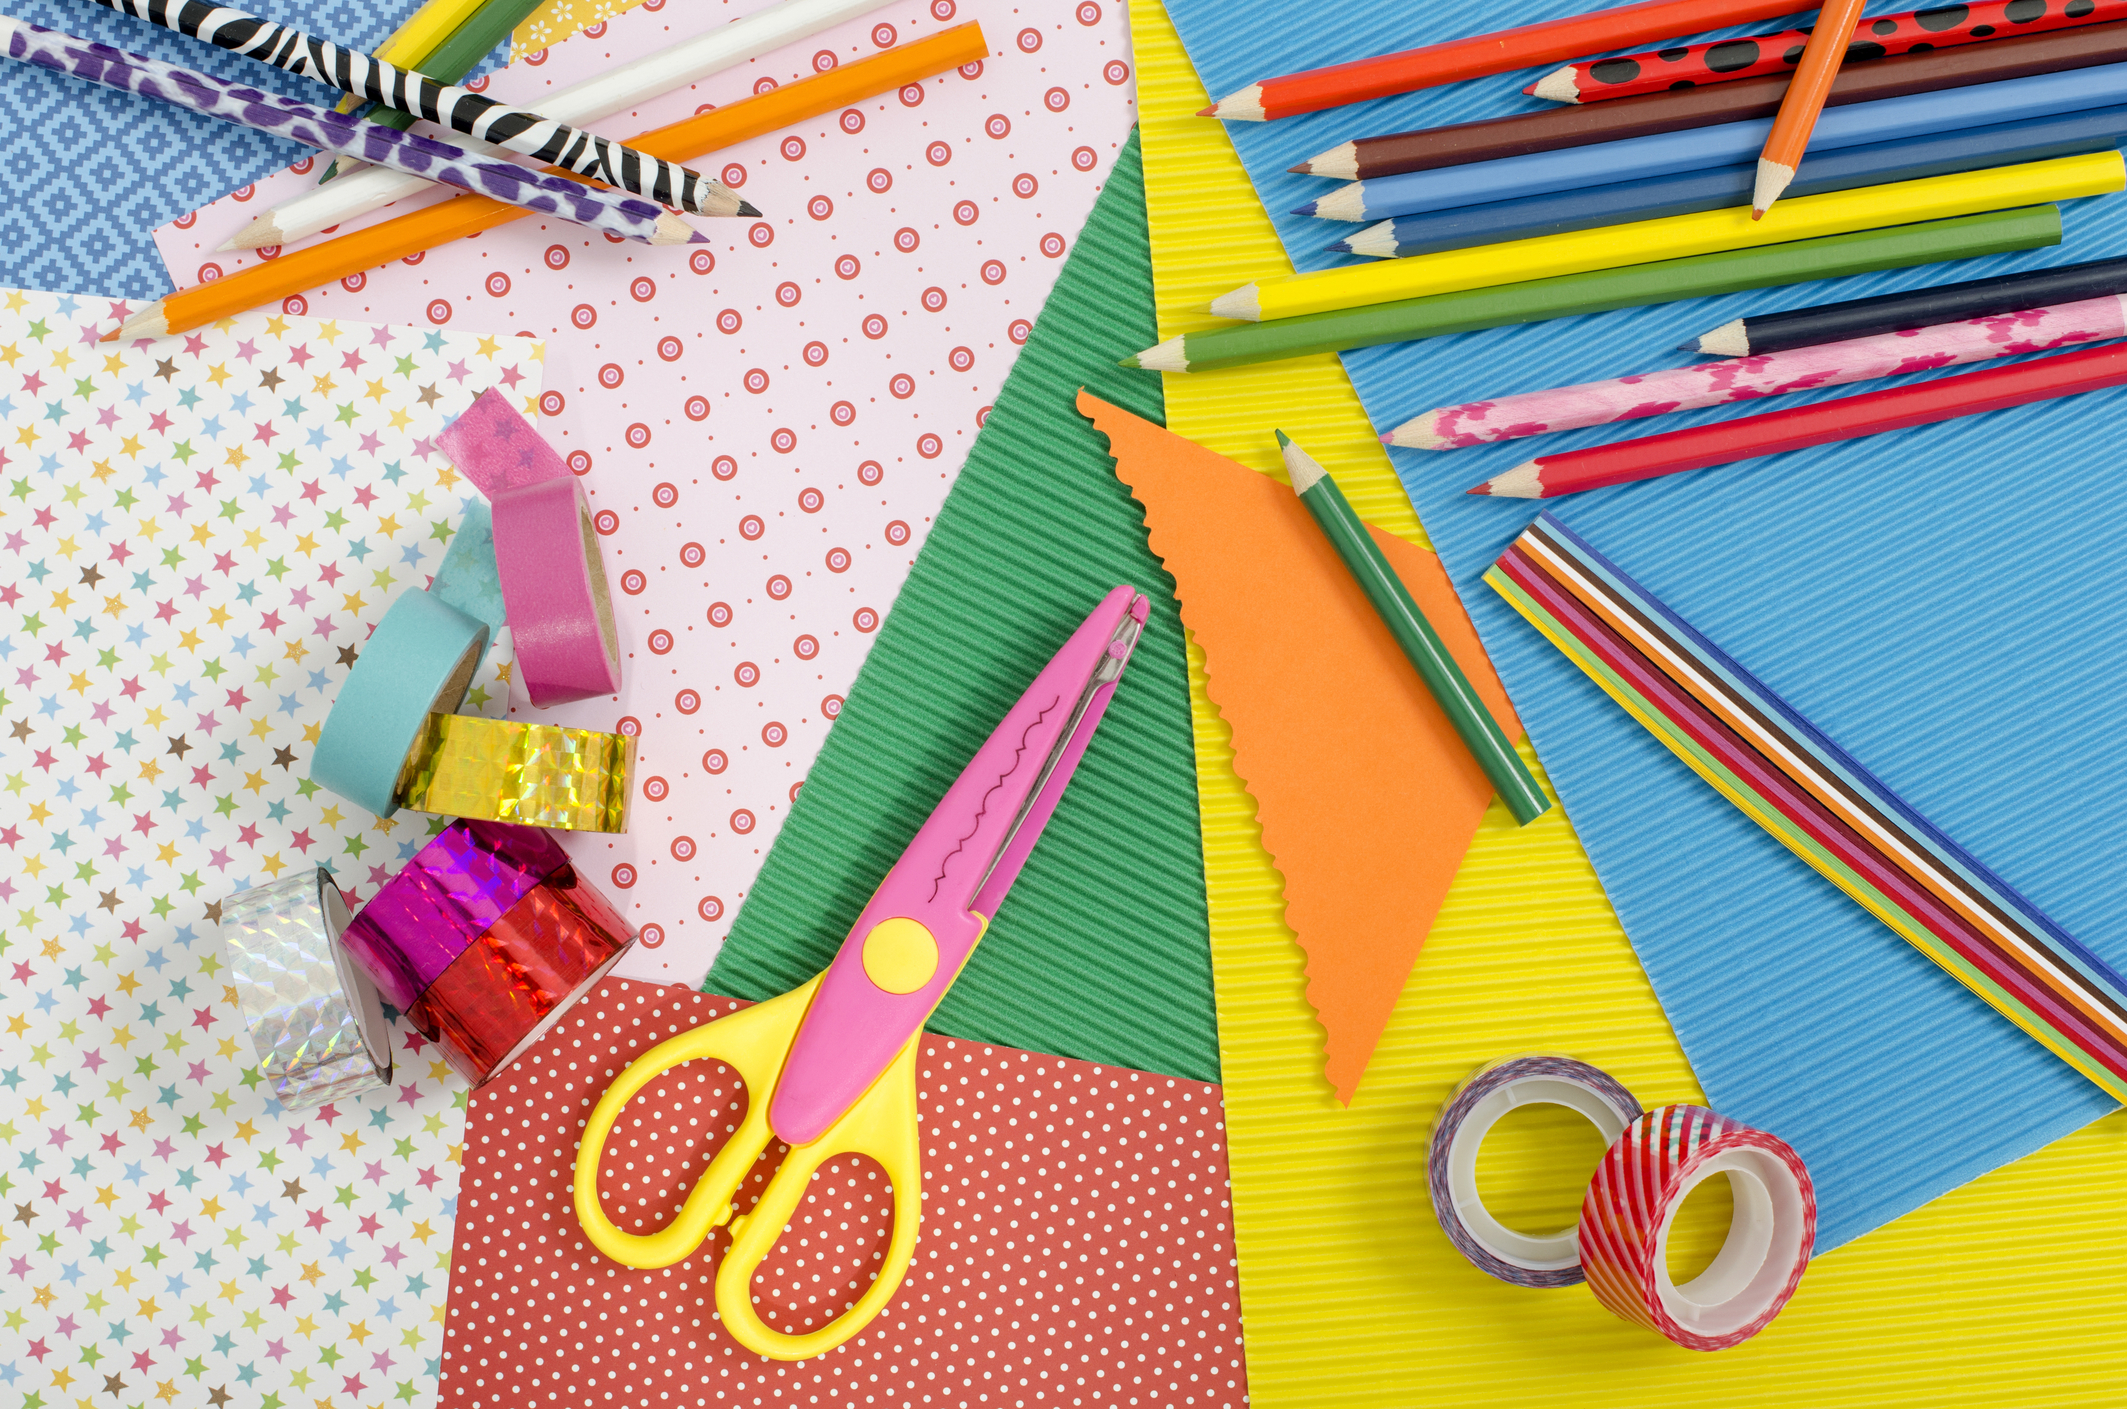 My Favorite Kids Craft Supplies (+ What's In Our Craft Closet